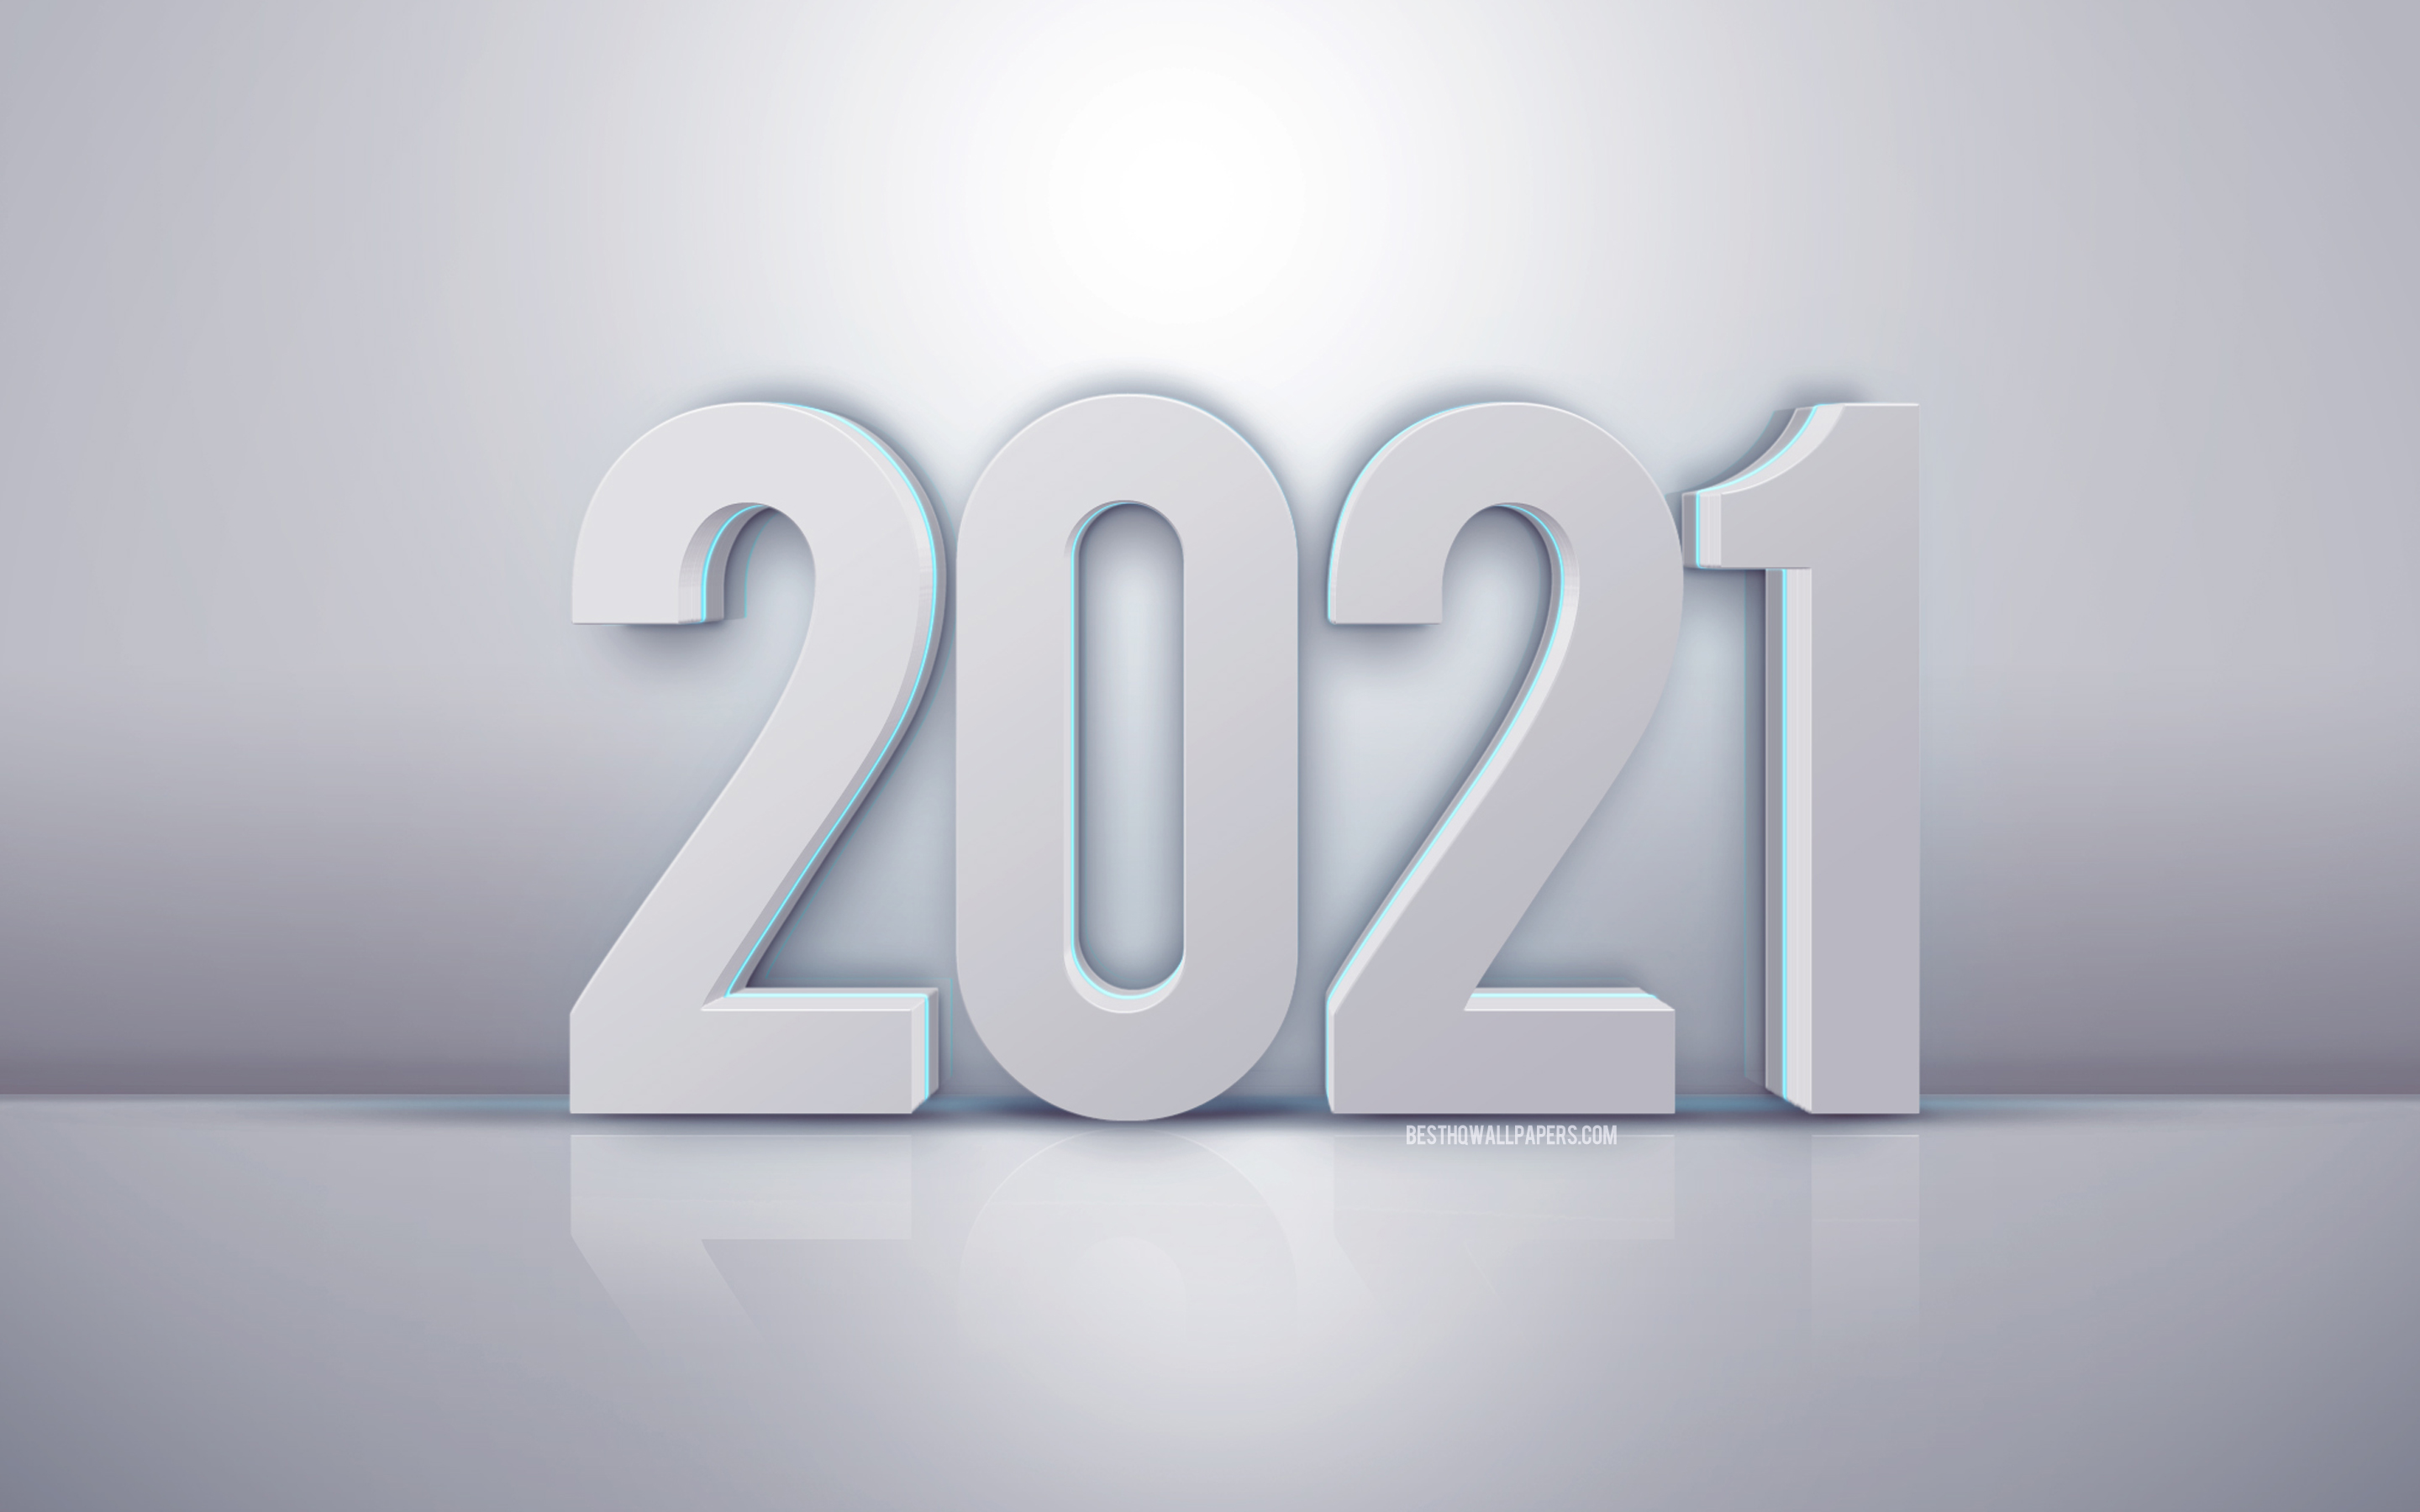 Download wallpapers 2021 New Year, white 3D letters, White 2021 background,  2021 3D art, white 3D 2021 background, Happy New Year 2021, 2021 concepts  for desktop with resolution 2880x1800. High Quality HD pictures wallpapers